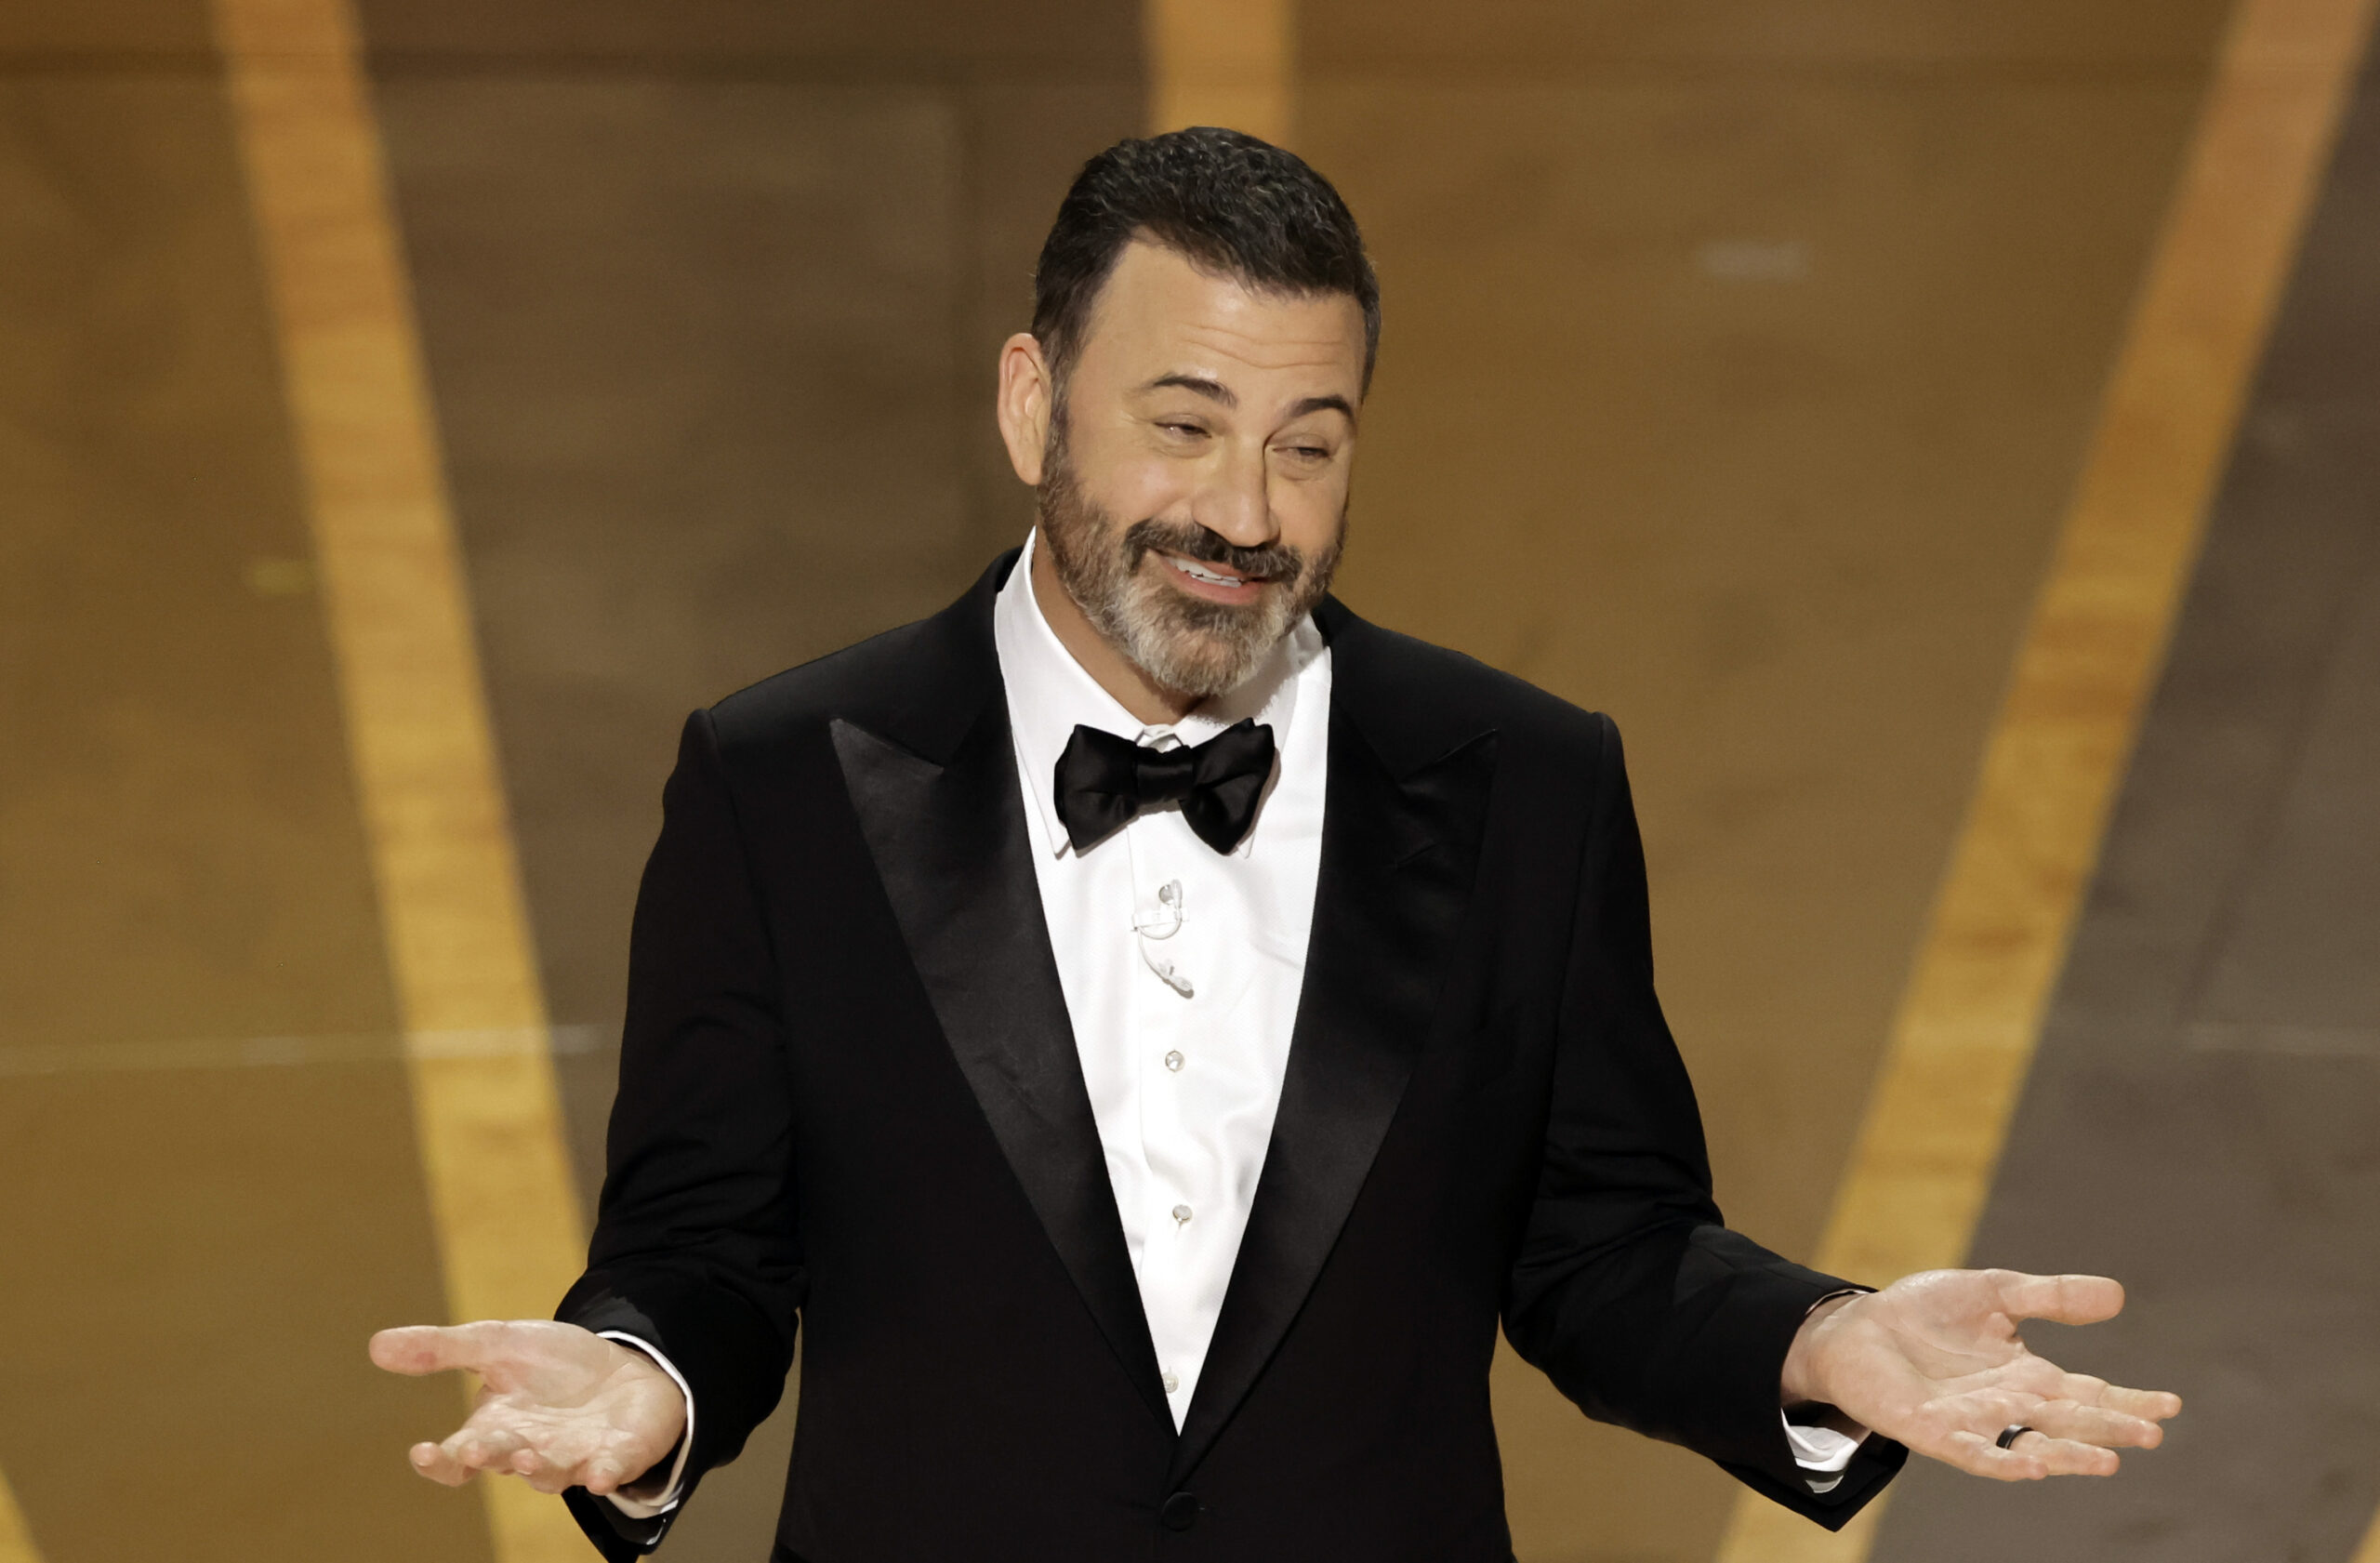 Jimmy Kimmel hints at departure from late-night TV